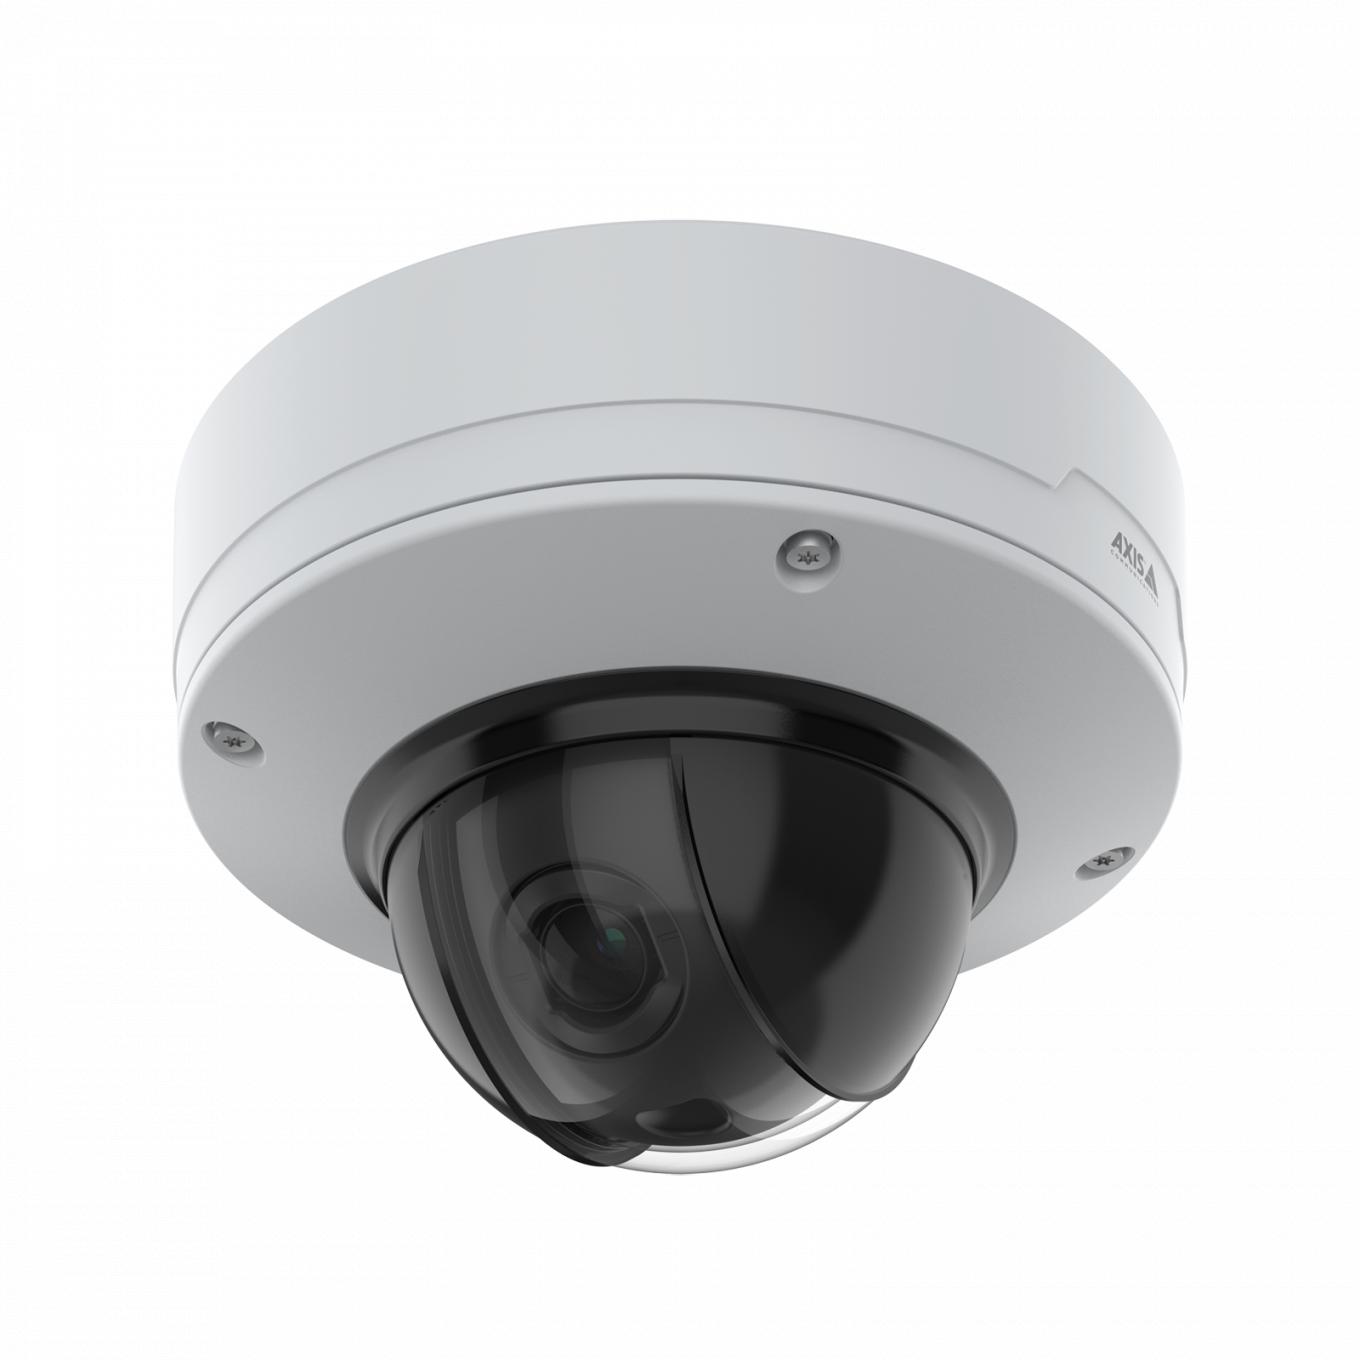 AXIS Q3536-LVE Dome Camera, ceiling mounted, viewed from its left angle